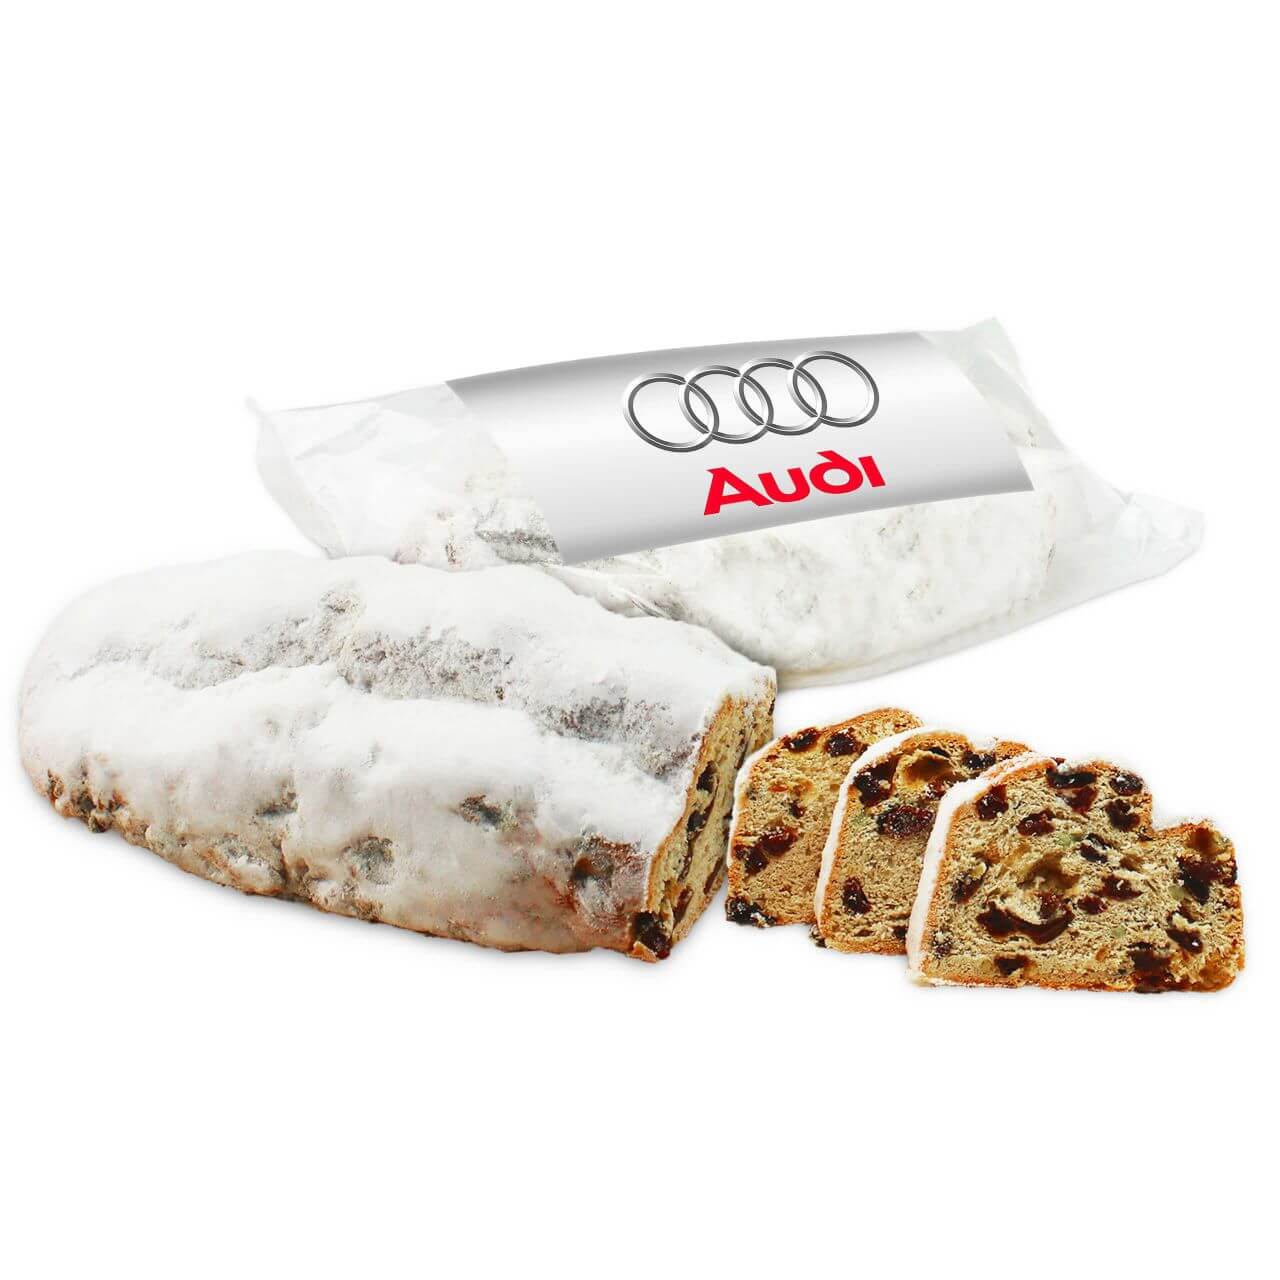 Rum -Stollen 750g with an individual label as a promotional gift